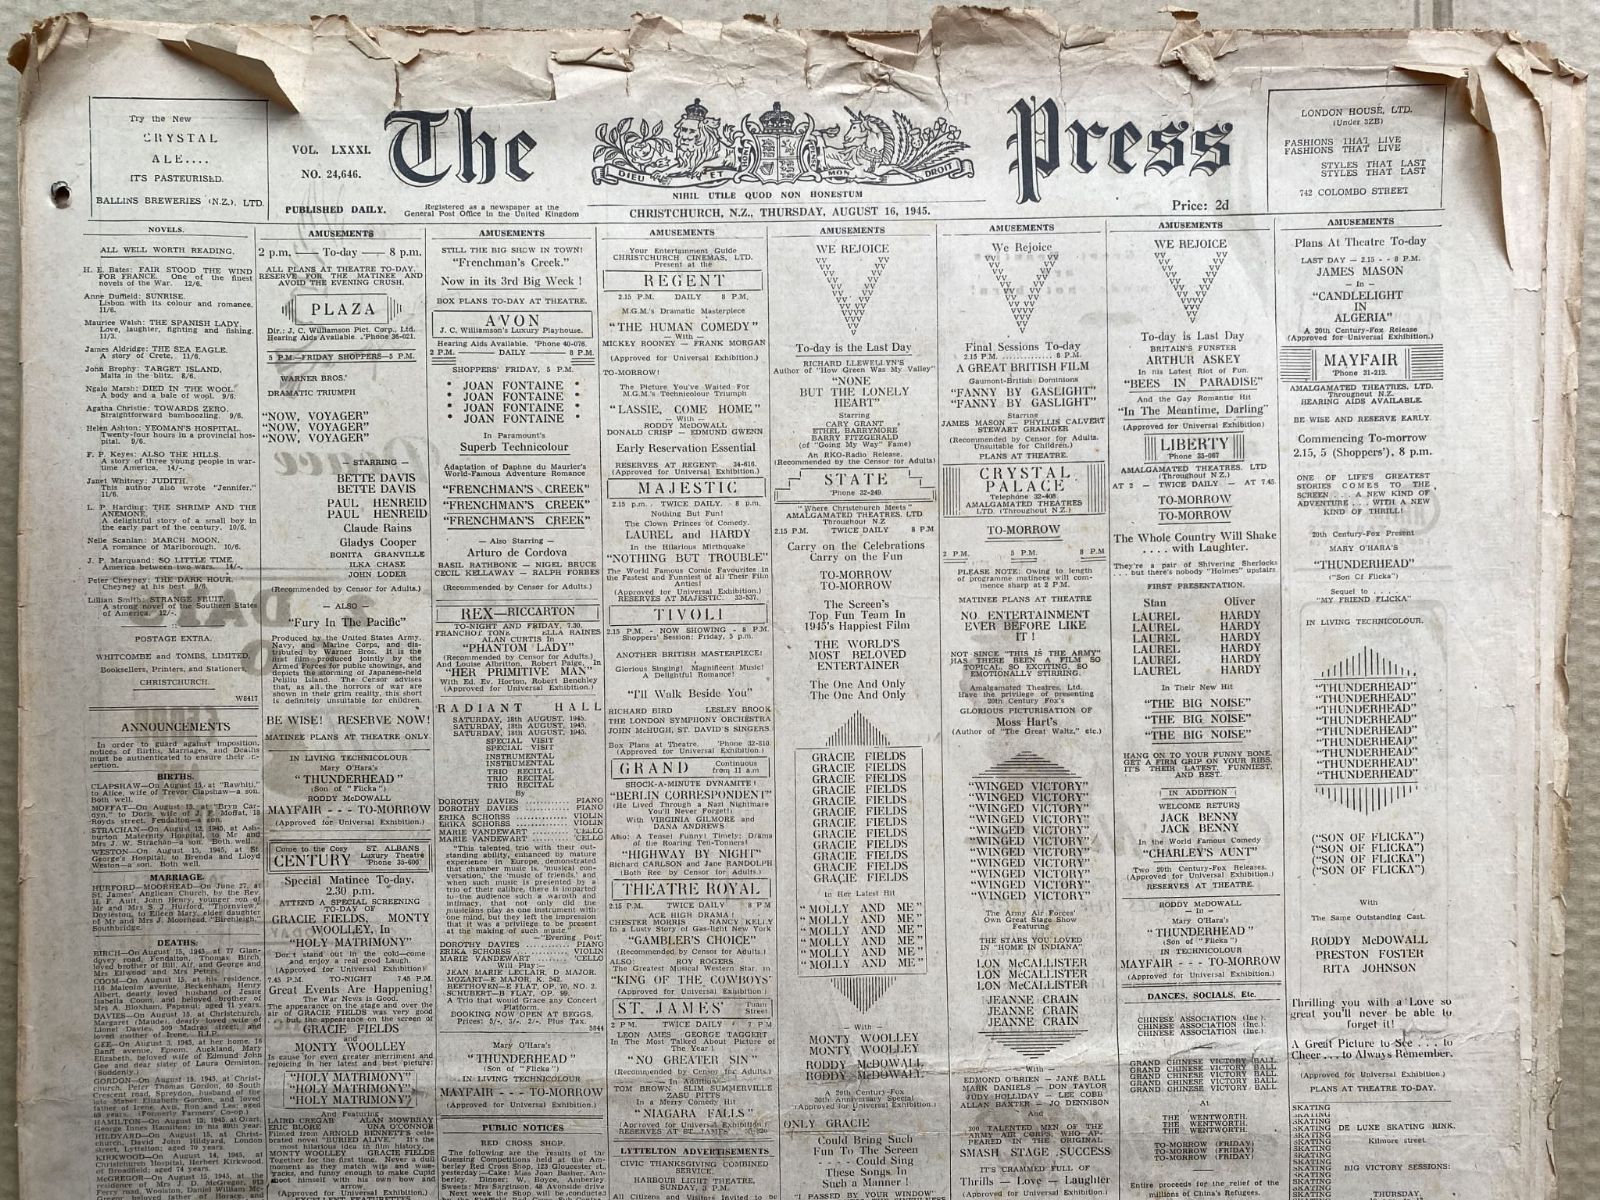 OLD NEWSPAPER: The Christchurch Press, 16 August 1945